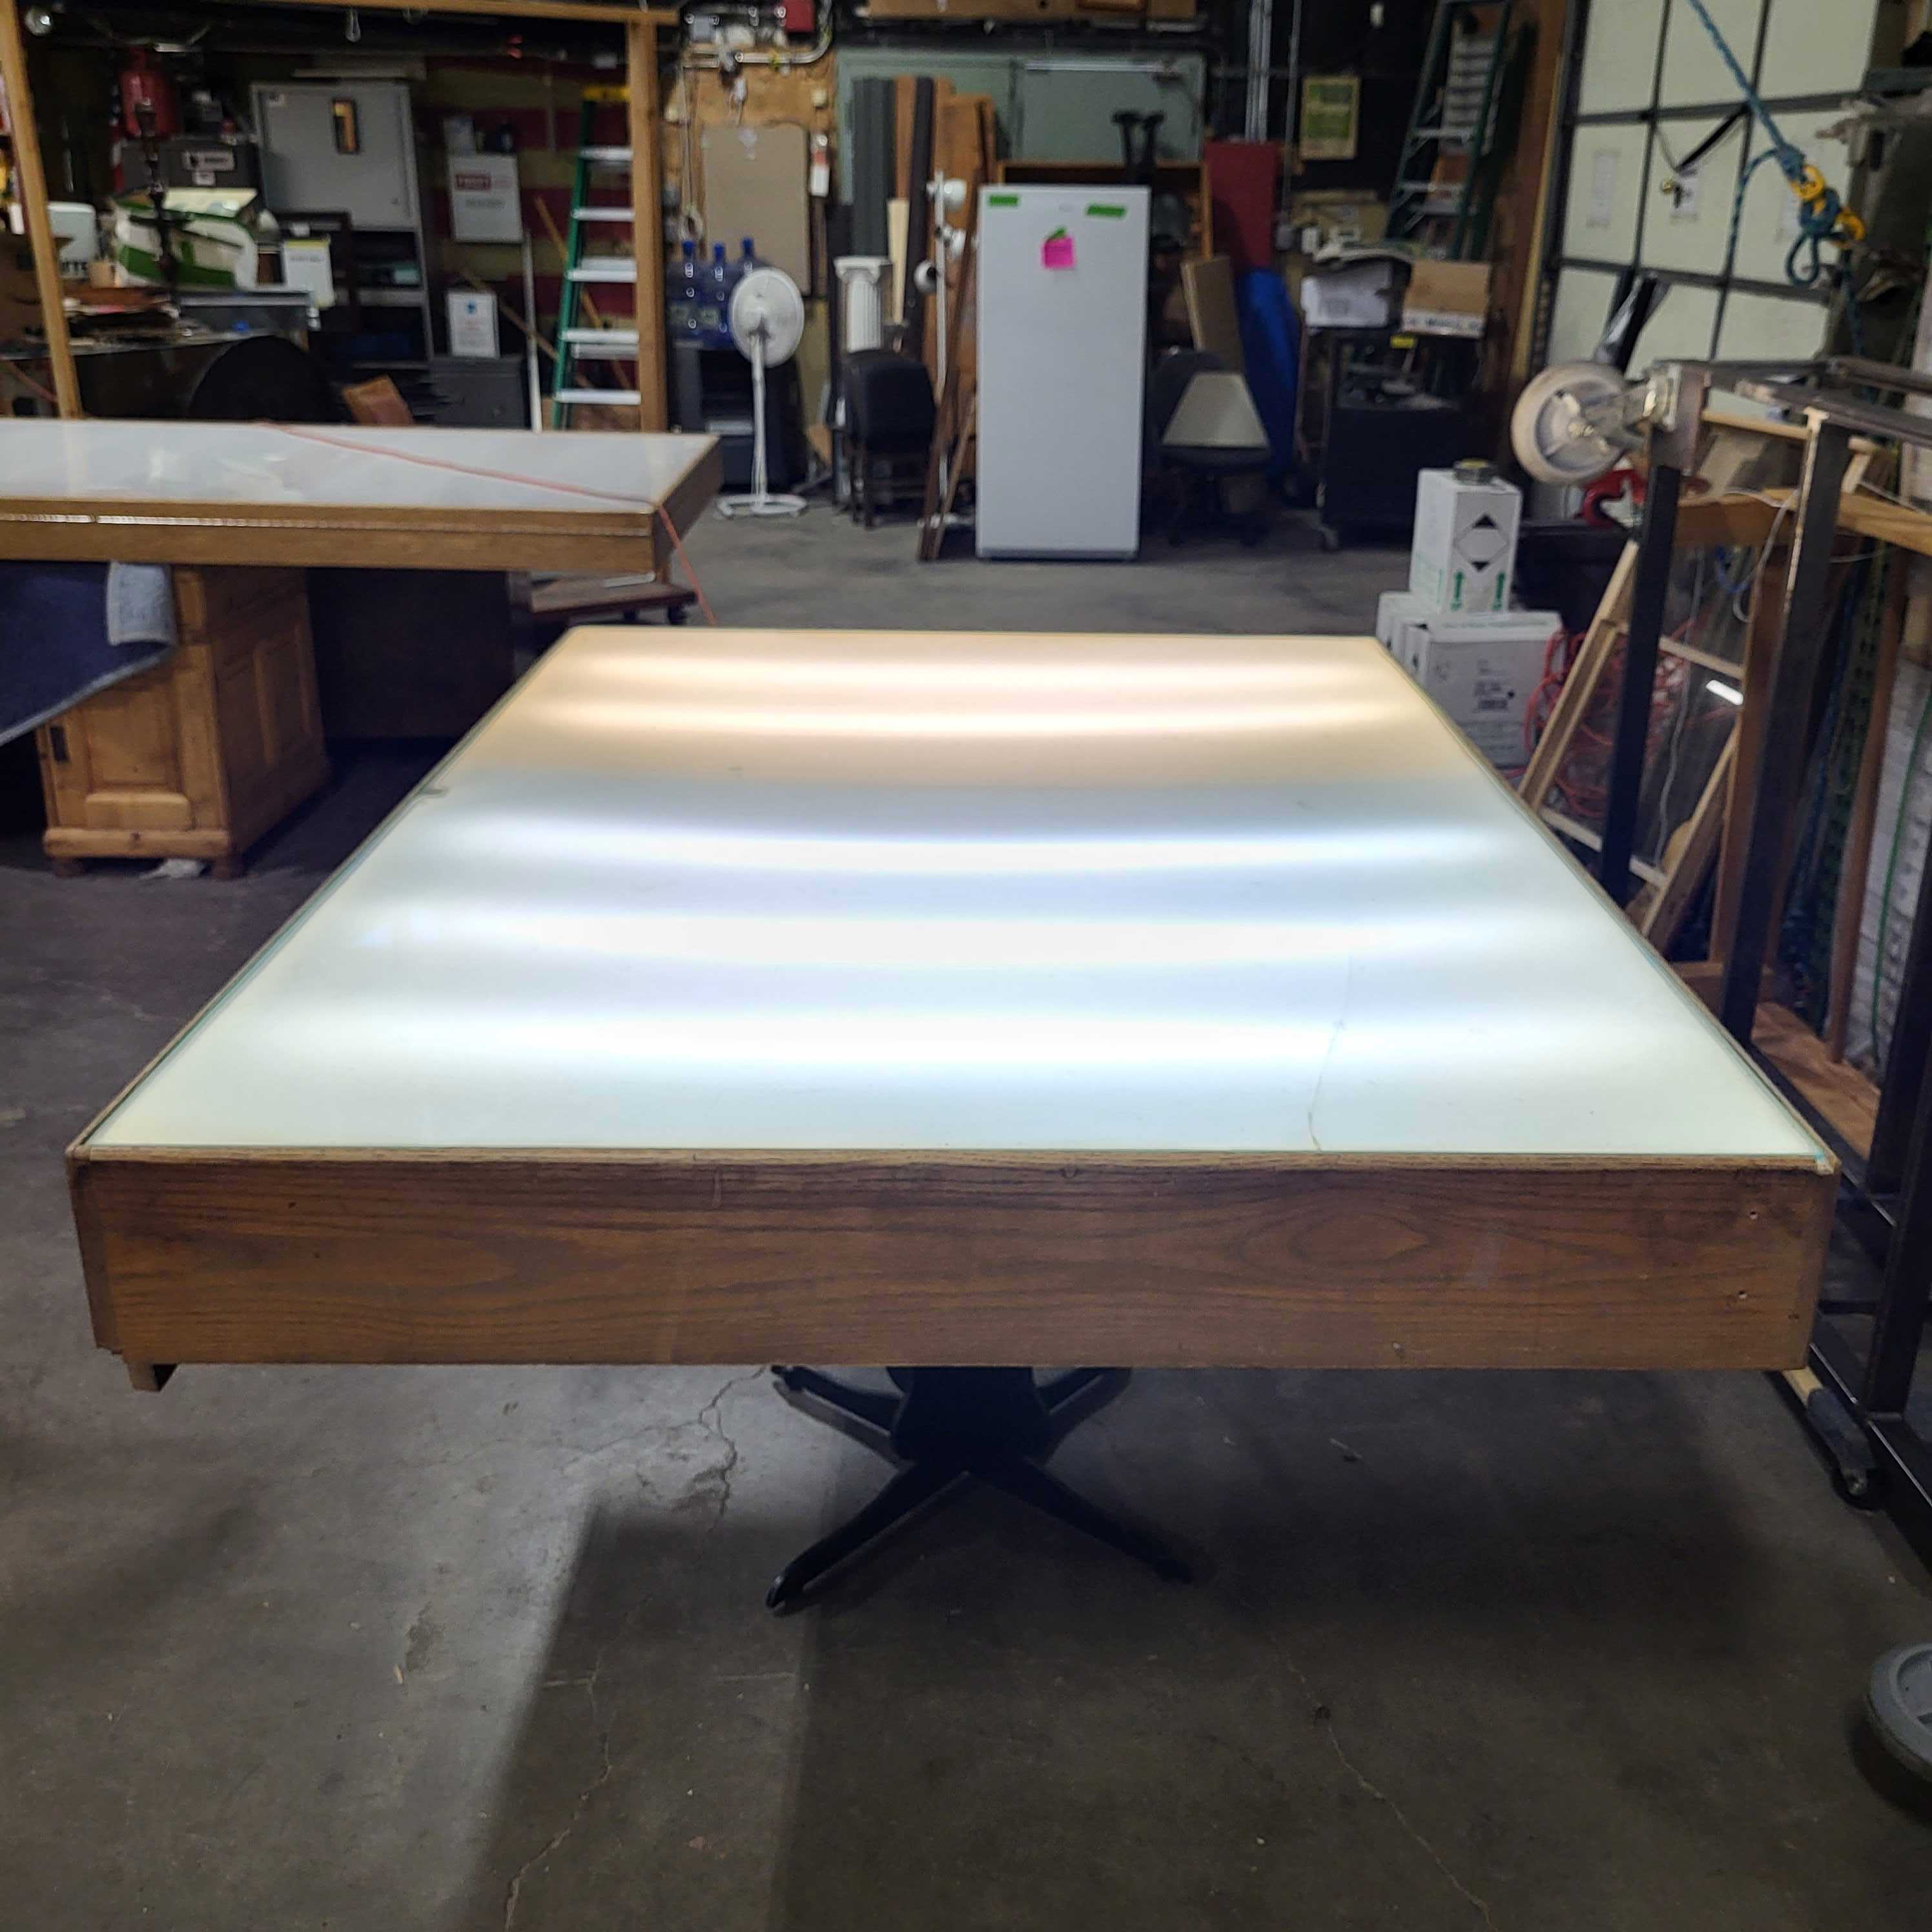 Large Light Box with Glass Top Drafting Table